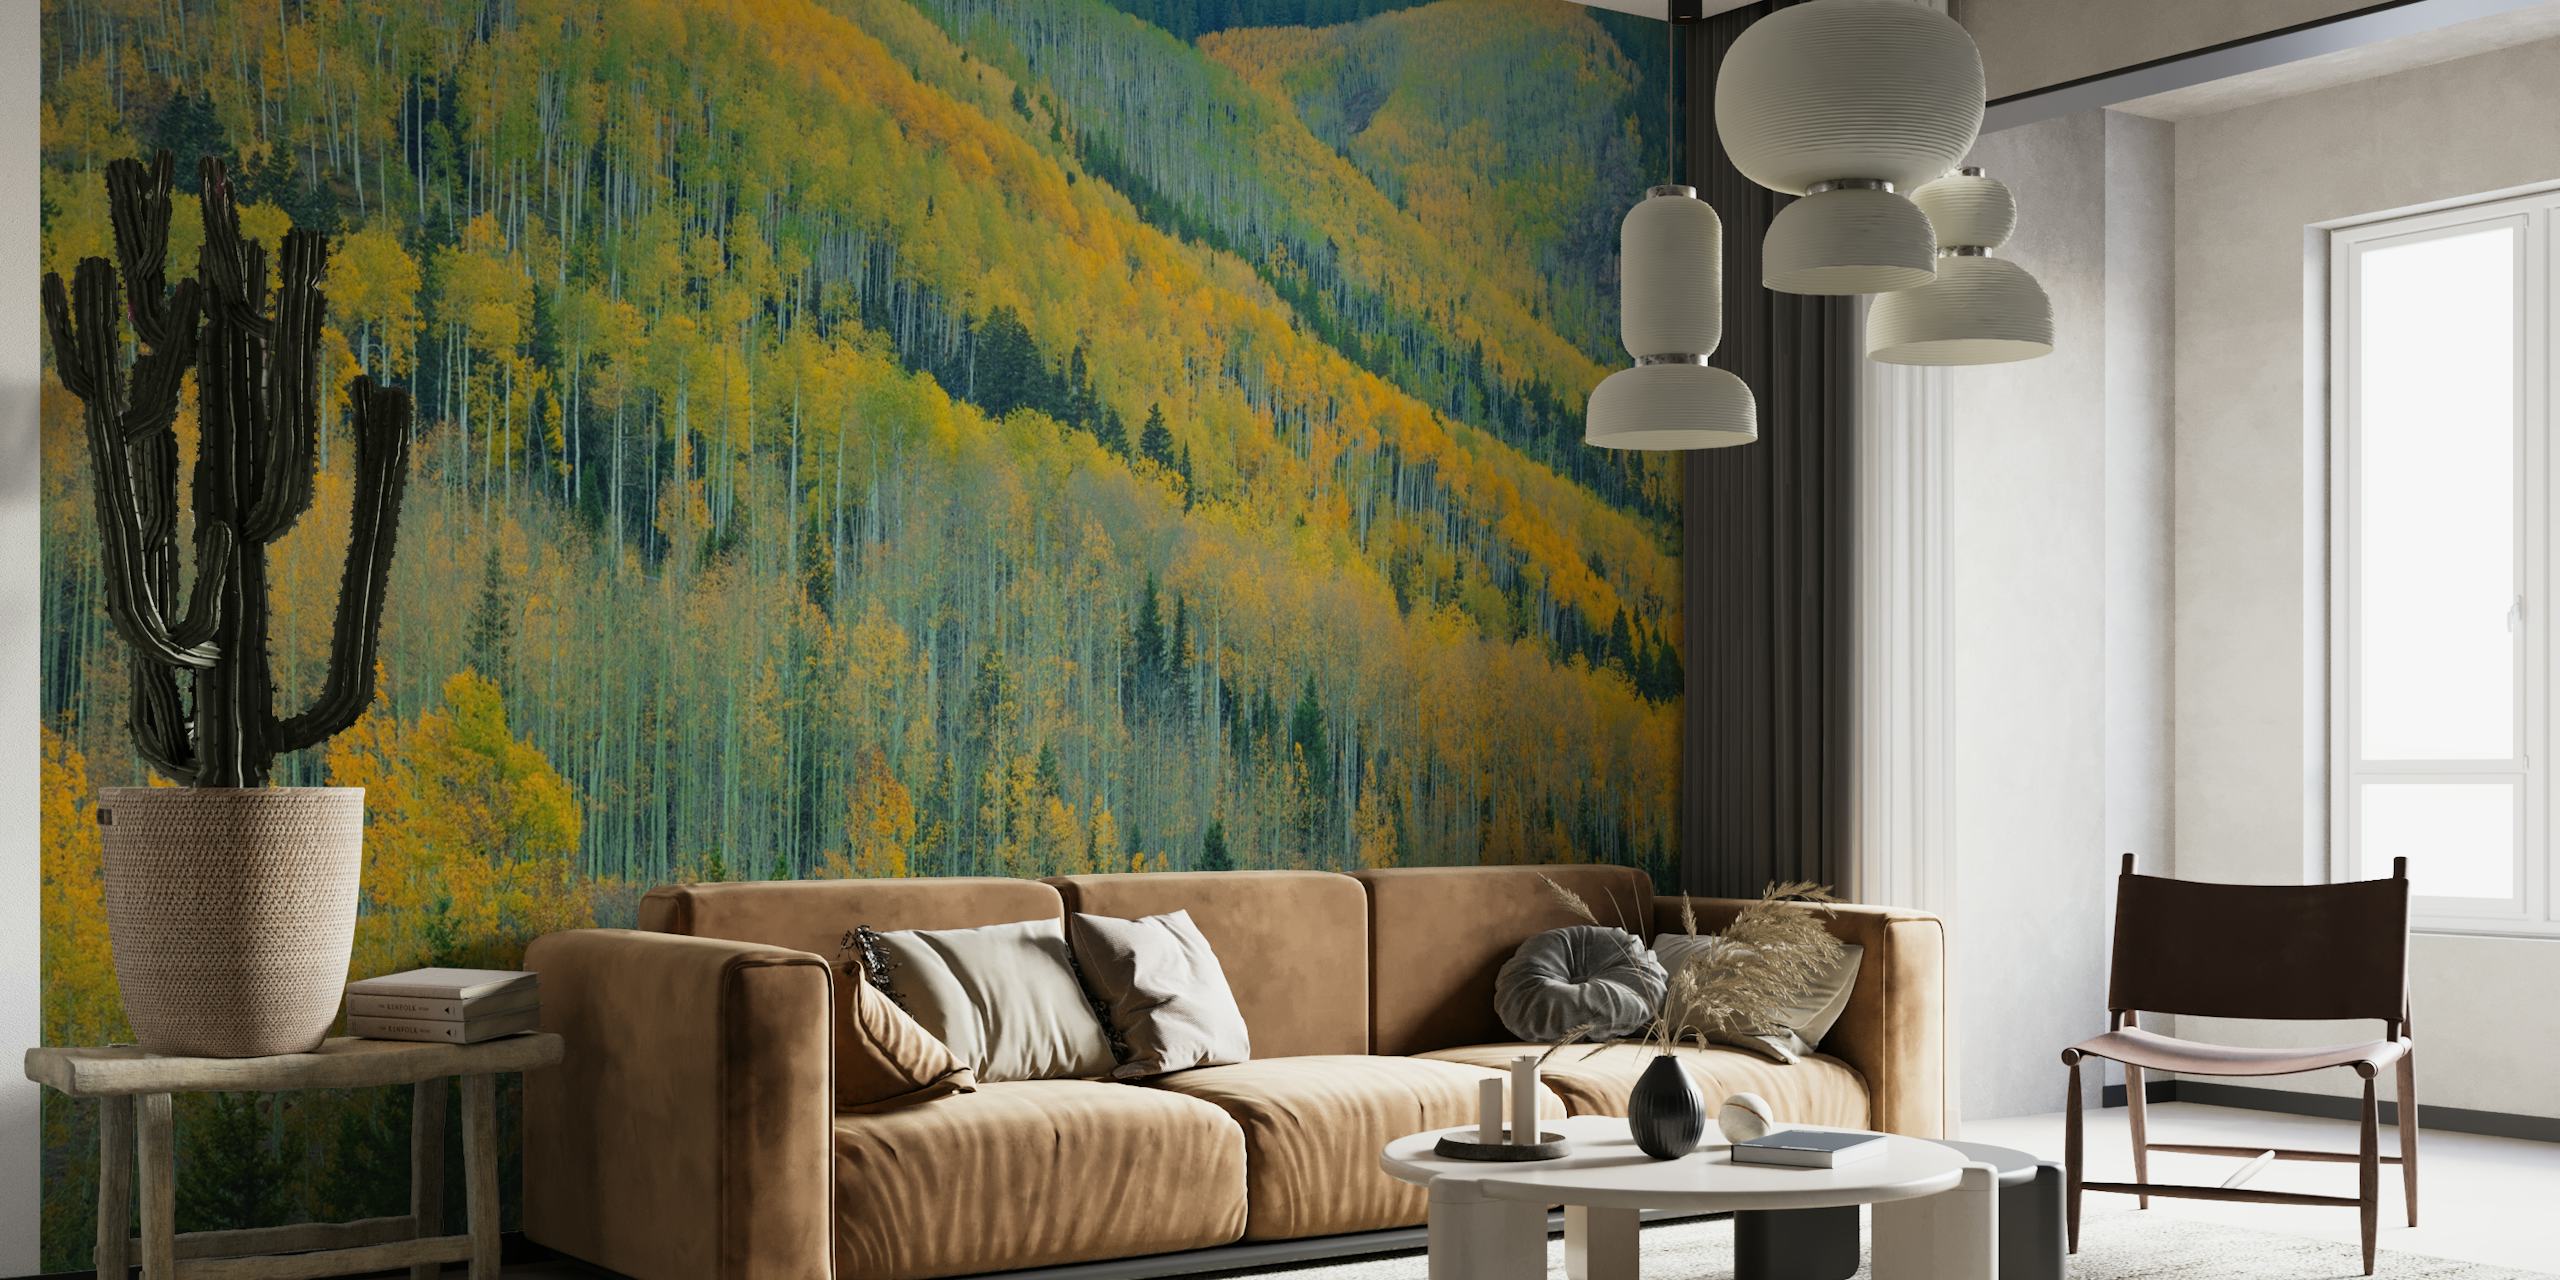 Aspen trees in autumn with yellow and orange leaves wall mural